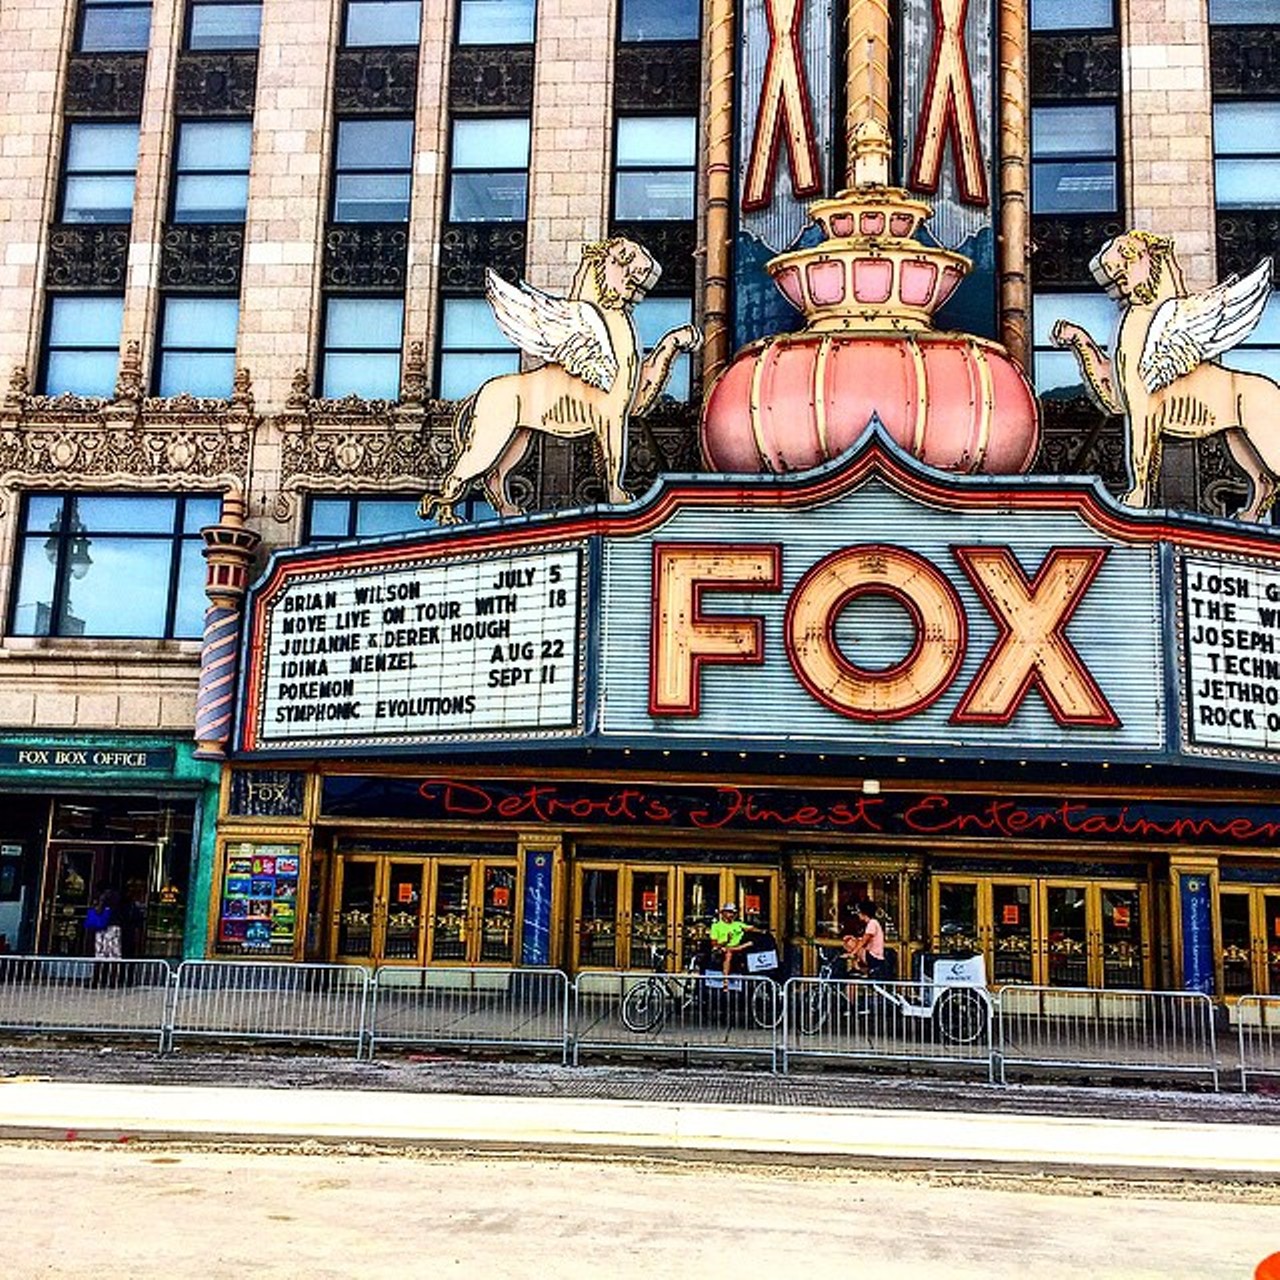 The Fox Theater
For those wanting a truly movie-worthy make out, head to the Fox Theater. One of five Fox Theaters in the U.S., the Detroit Fox Theater was the premier movie viewing place and continues to host a variety of shows and acts. Can&#146;t afford to see a show inside? No worries, just swap spit underneath the giant marquee; 2211 Woodward Ave., olympiaenertainment.com/fox-theatre. (Photo courtesy of Instagram user keith_hasting)